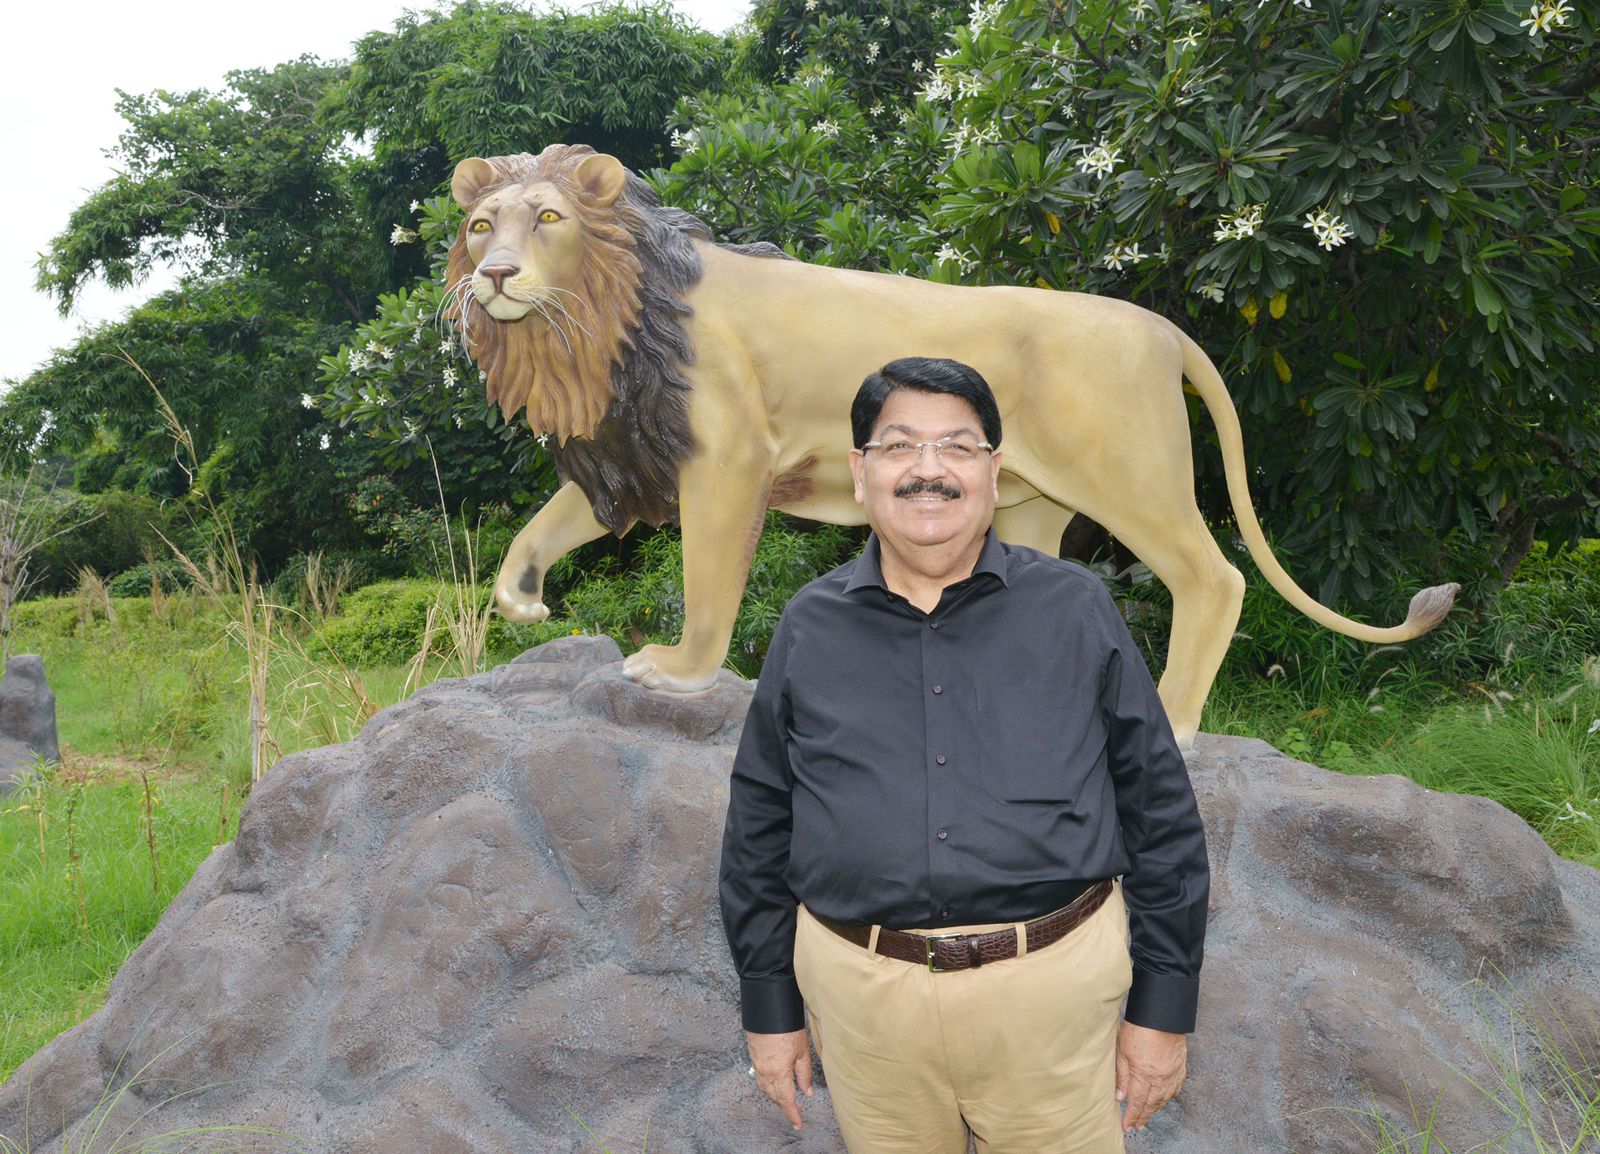 Reliance builds parapets around 1534 open wells in Gir Protected Area for Lion safety